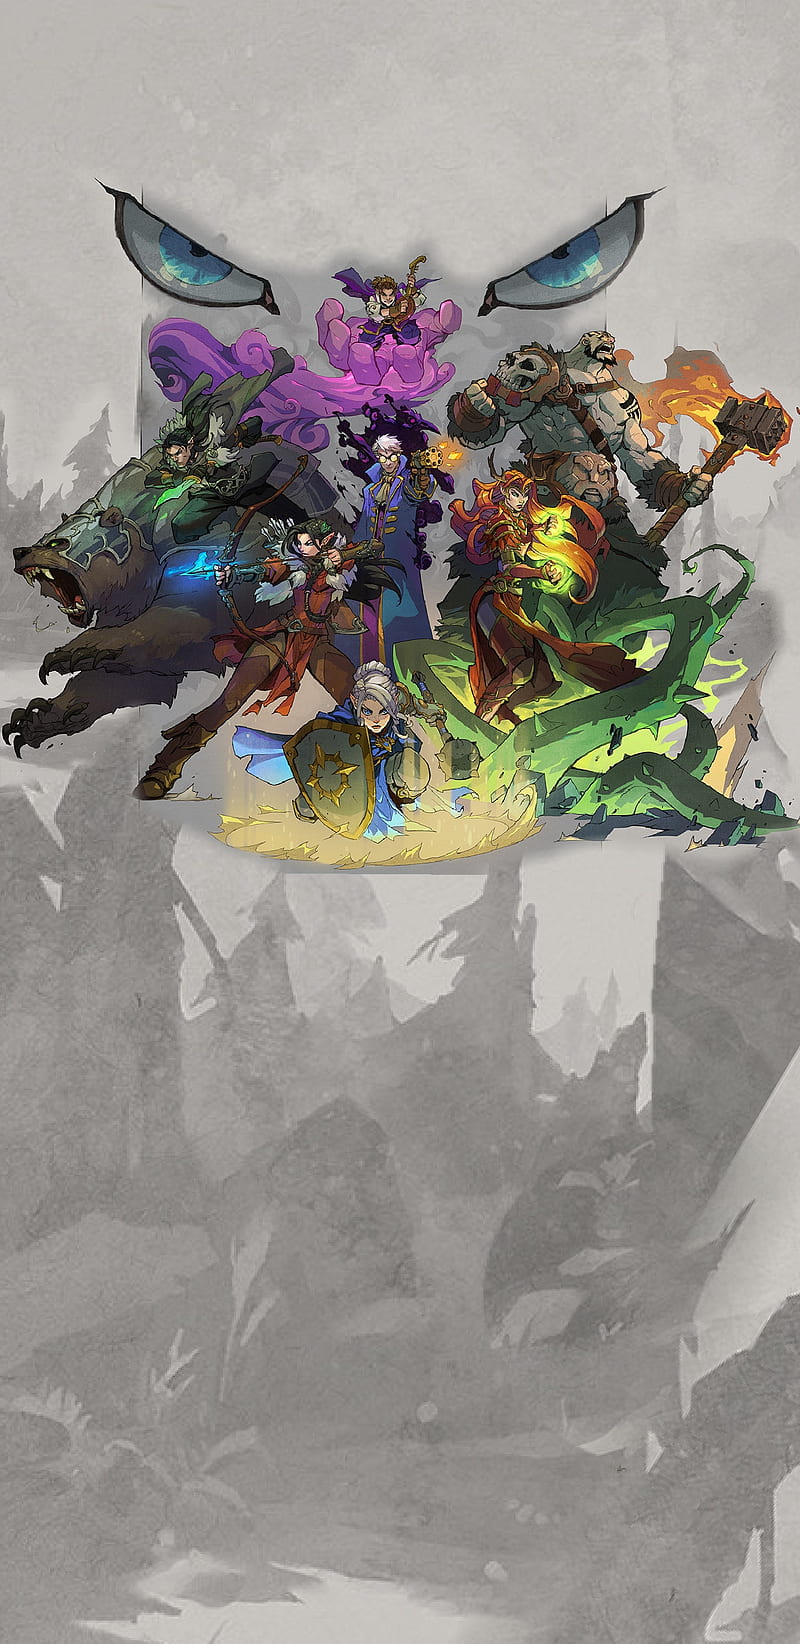 Vox machina top, critical, dice, dm, dnd, dragons, dungeons, role, vox machina, HD mobile wallpaper